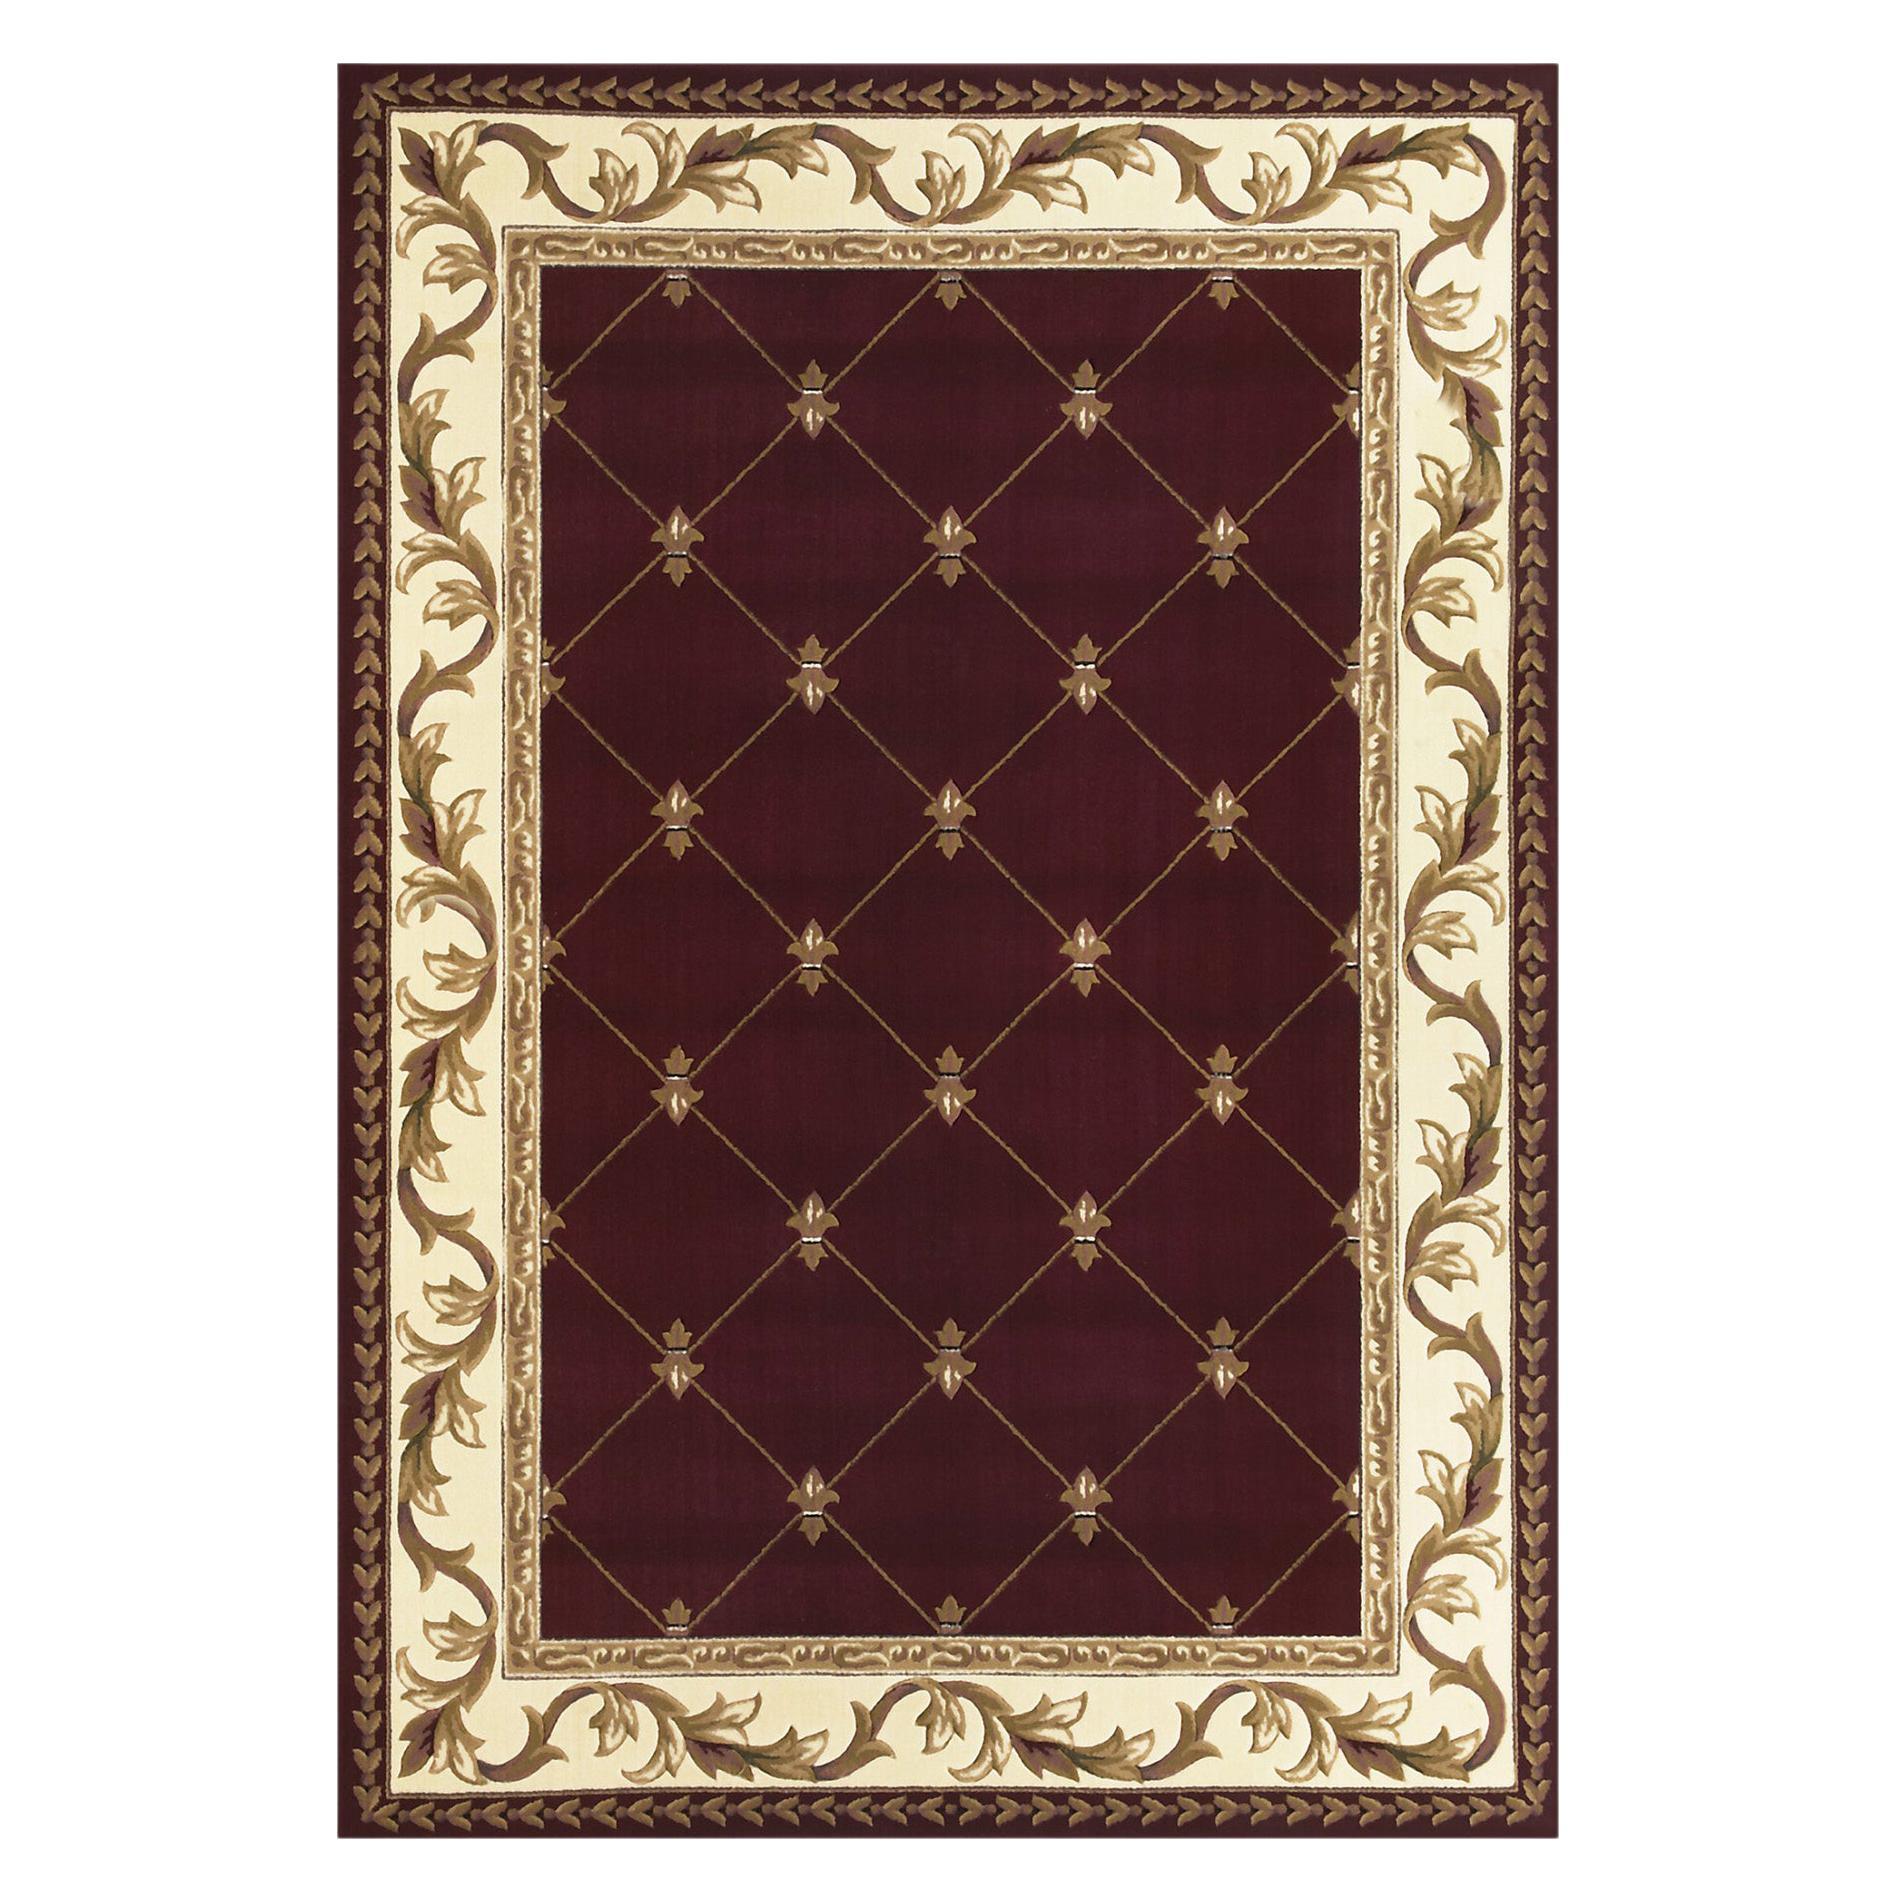 21st Century Bamboo Silk Handknotted Rug by Modenese Interiors, Red and Gold